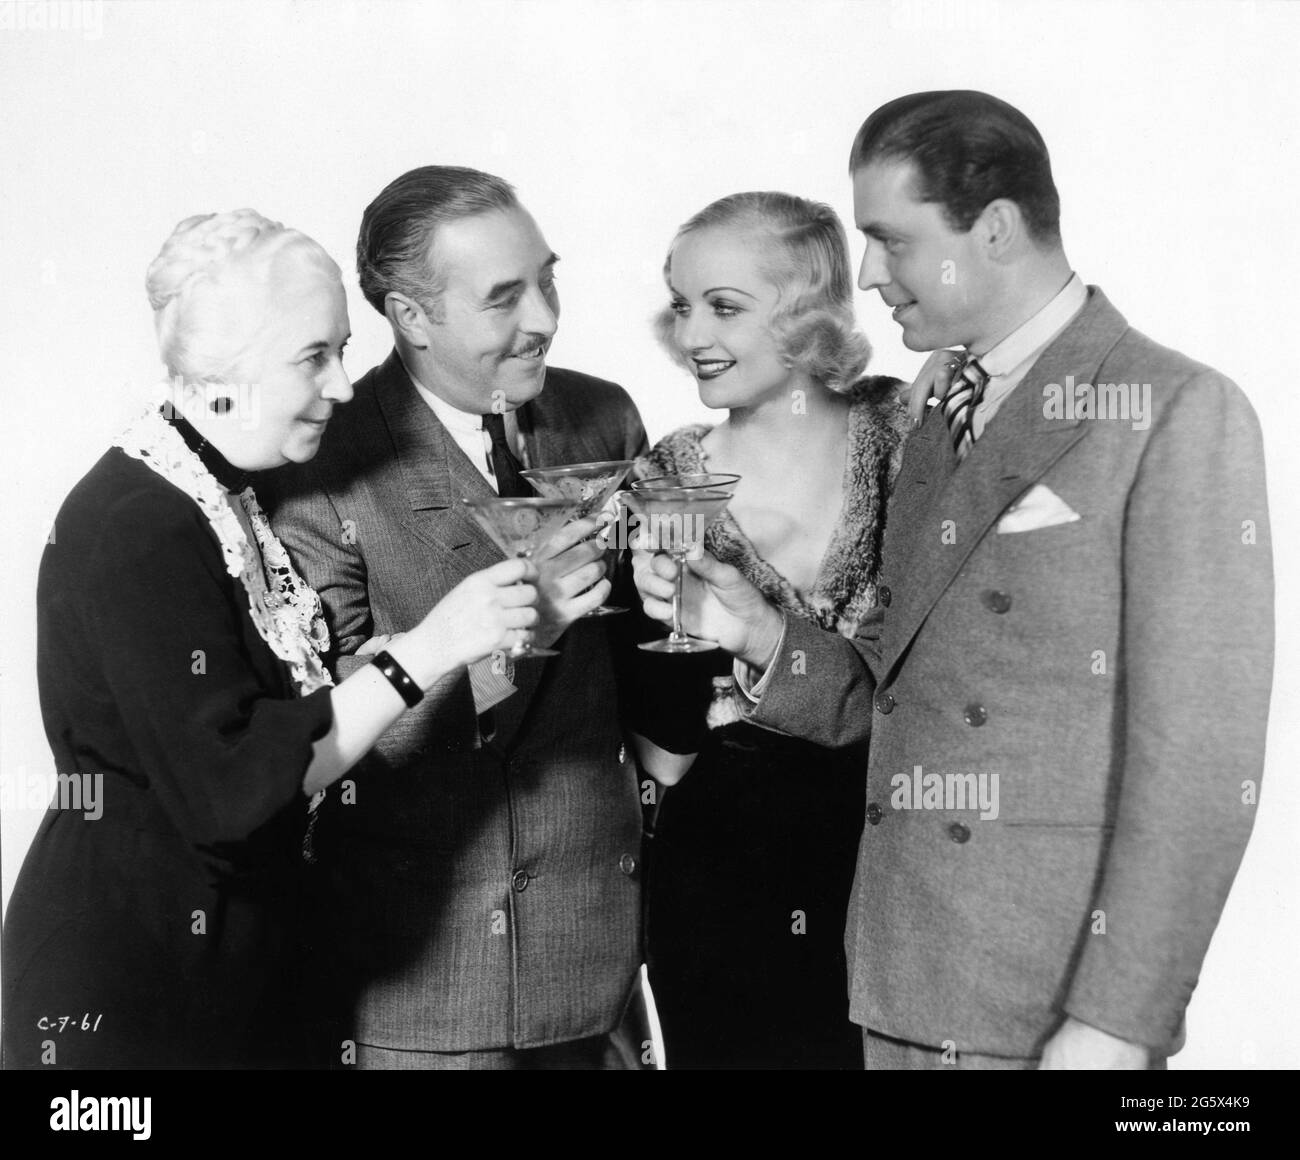 LOUISE CLOSSER HALE WALTER CONNOLLY CAROLE LOMBARD and LYLE TALBOT in NO MORE ORCHIDS 1932 director WALTER LANG story Grace Perkins adaptation Keene Thompson screenplay Gertrude Purcell cinematography Joseph H. August costume design Robert Kalloch Columbia Pictures Stock Photo